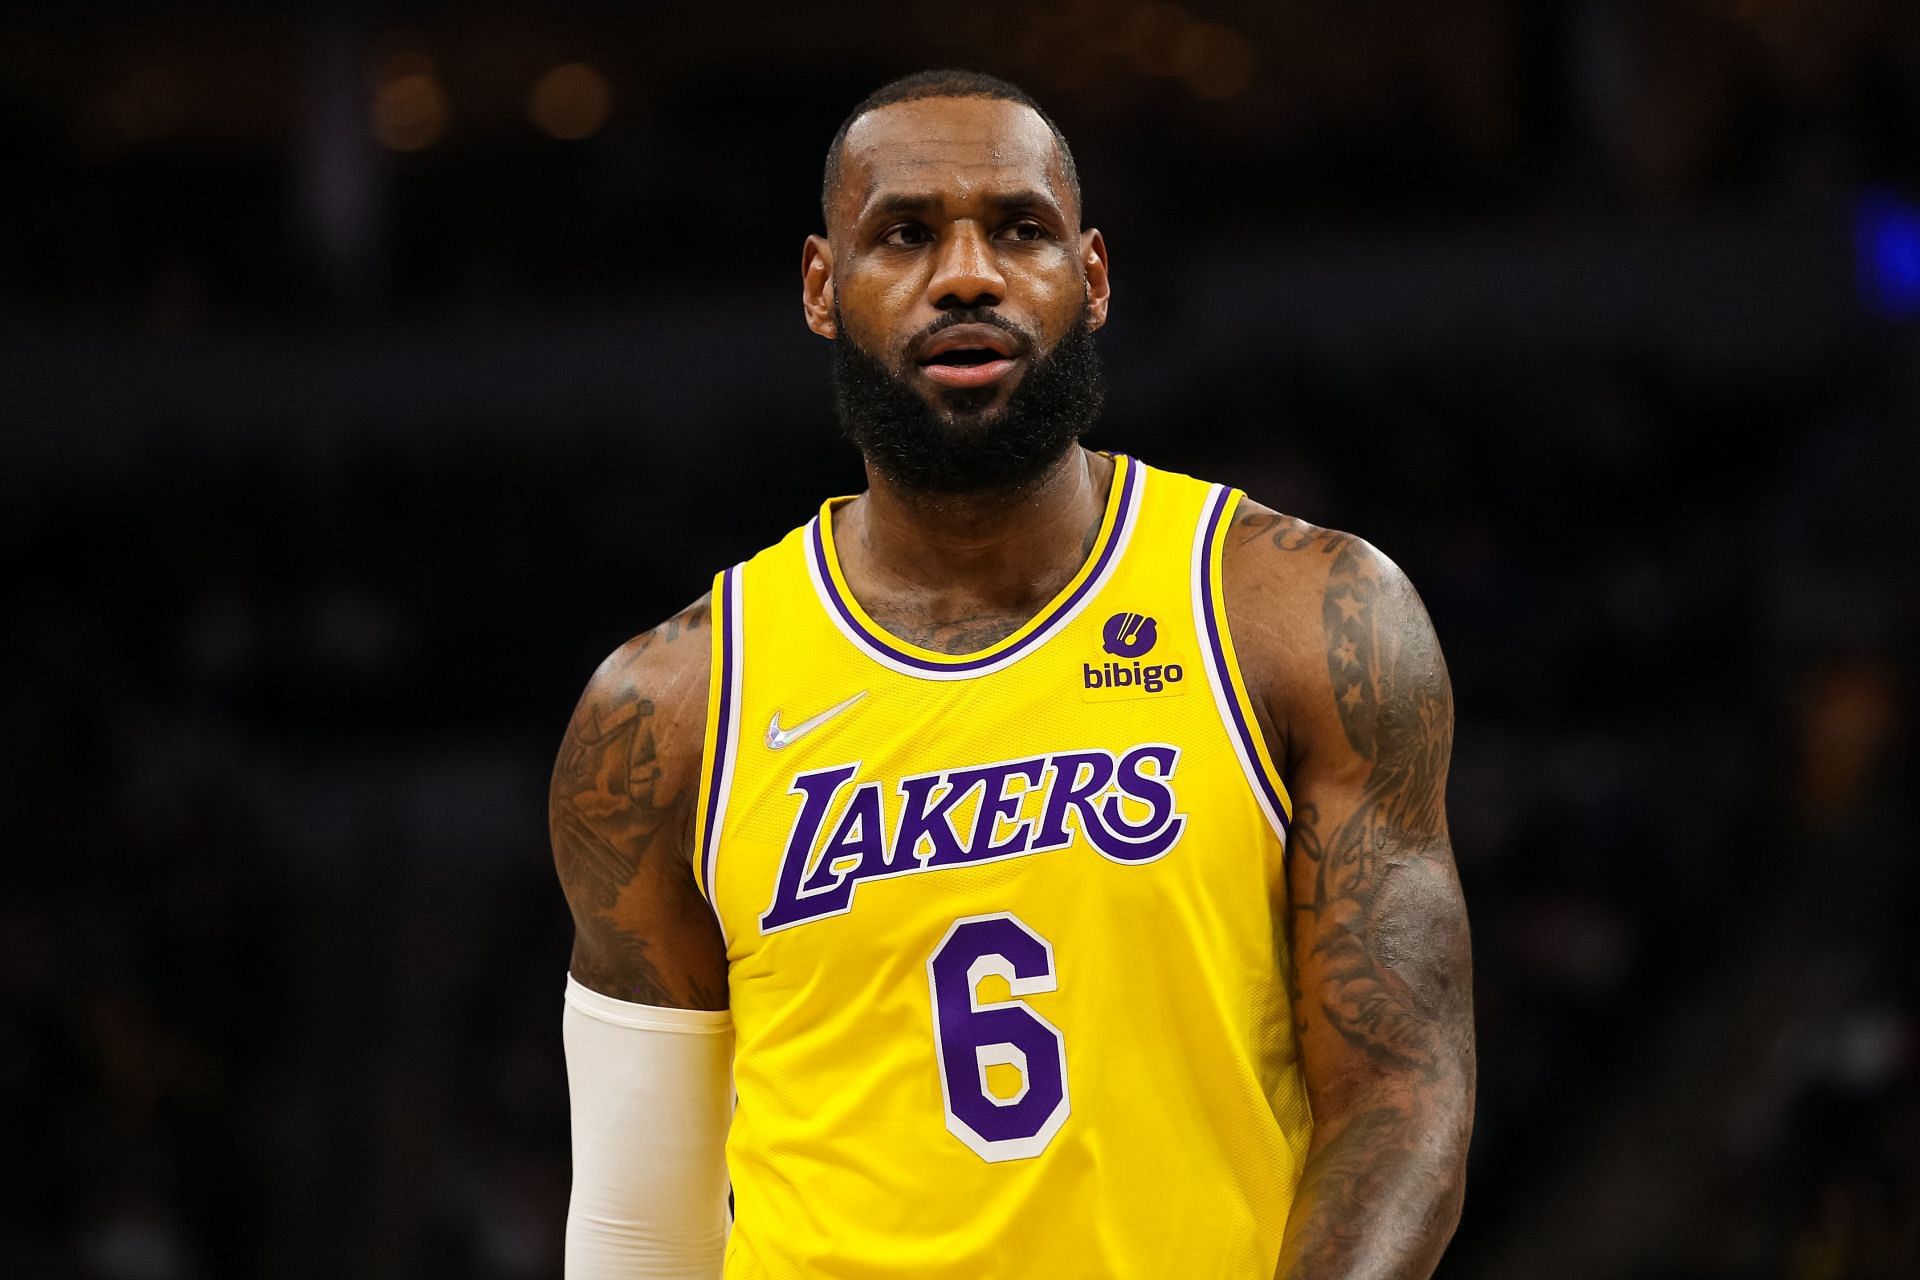 NBA Superstsar LeBron James #6 of the Los Angeles Lakers